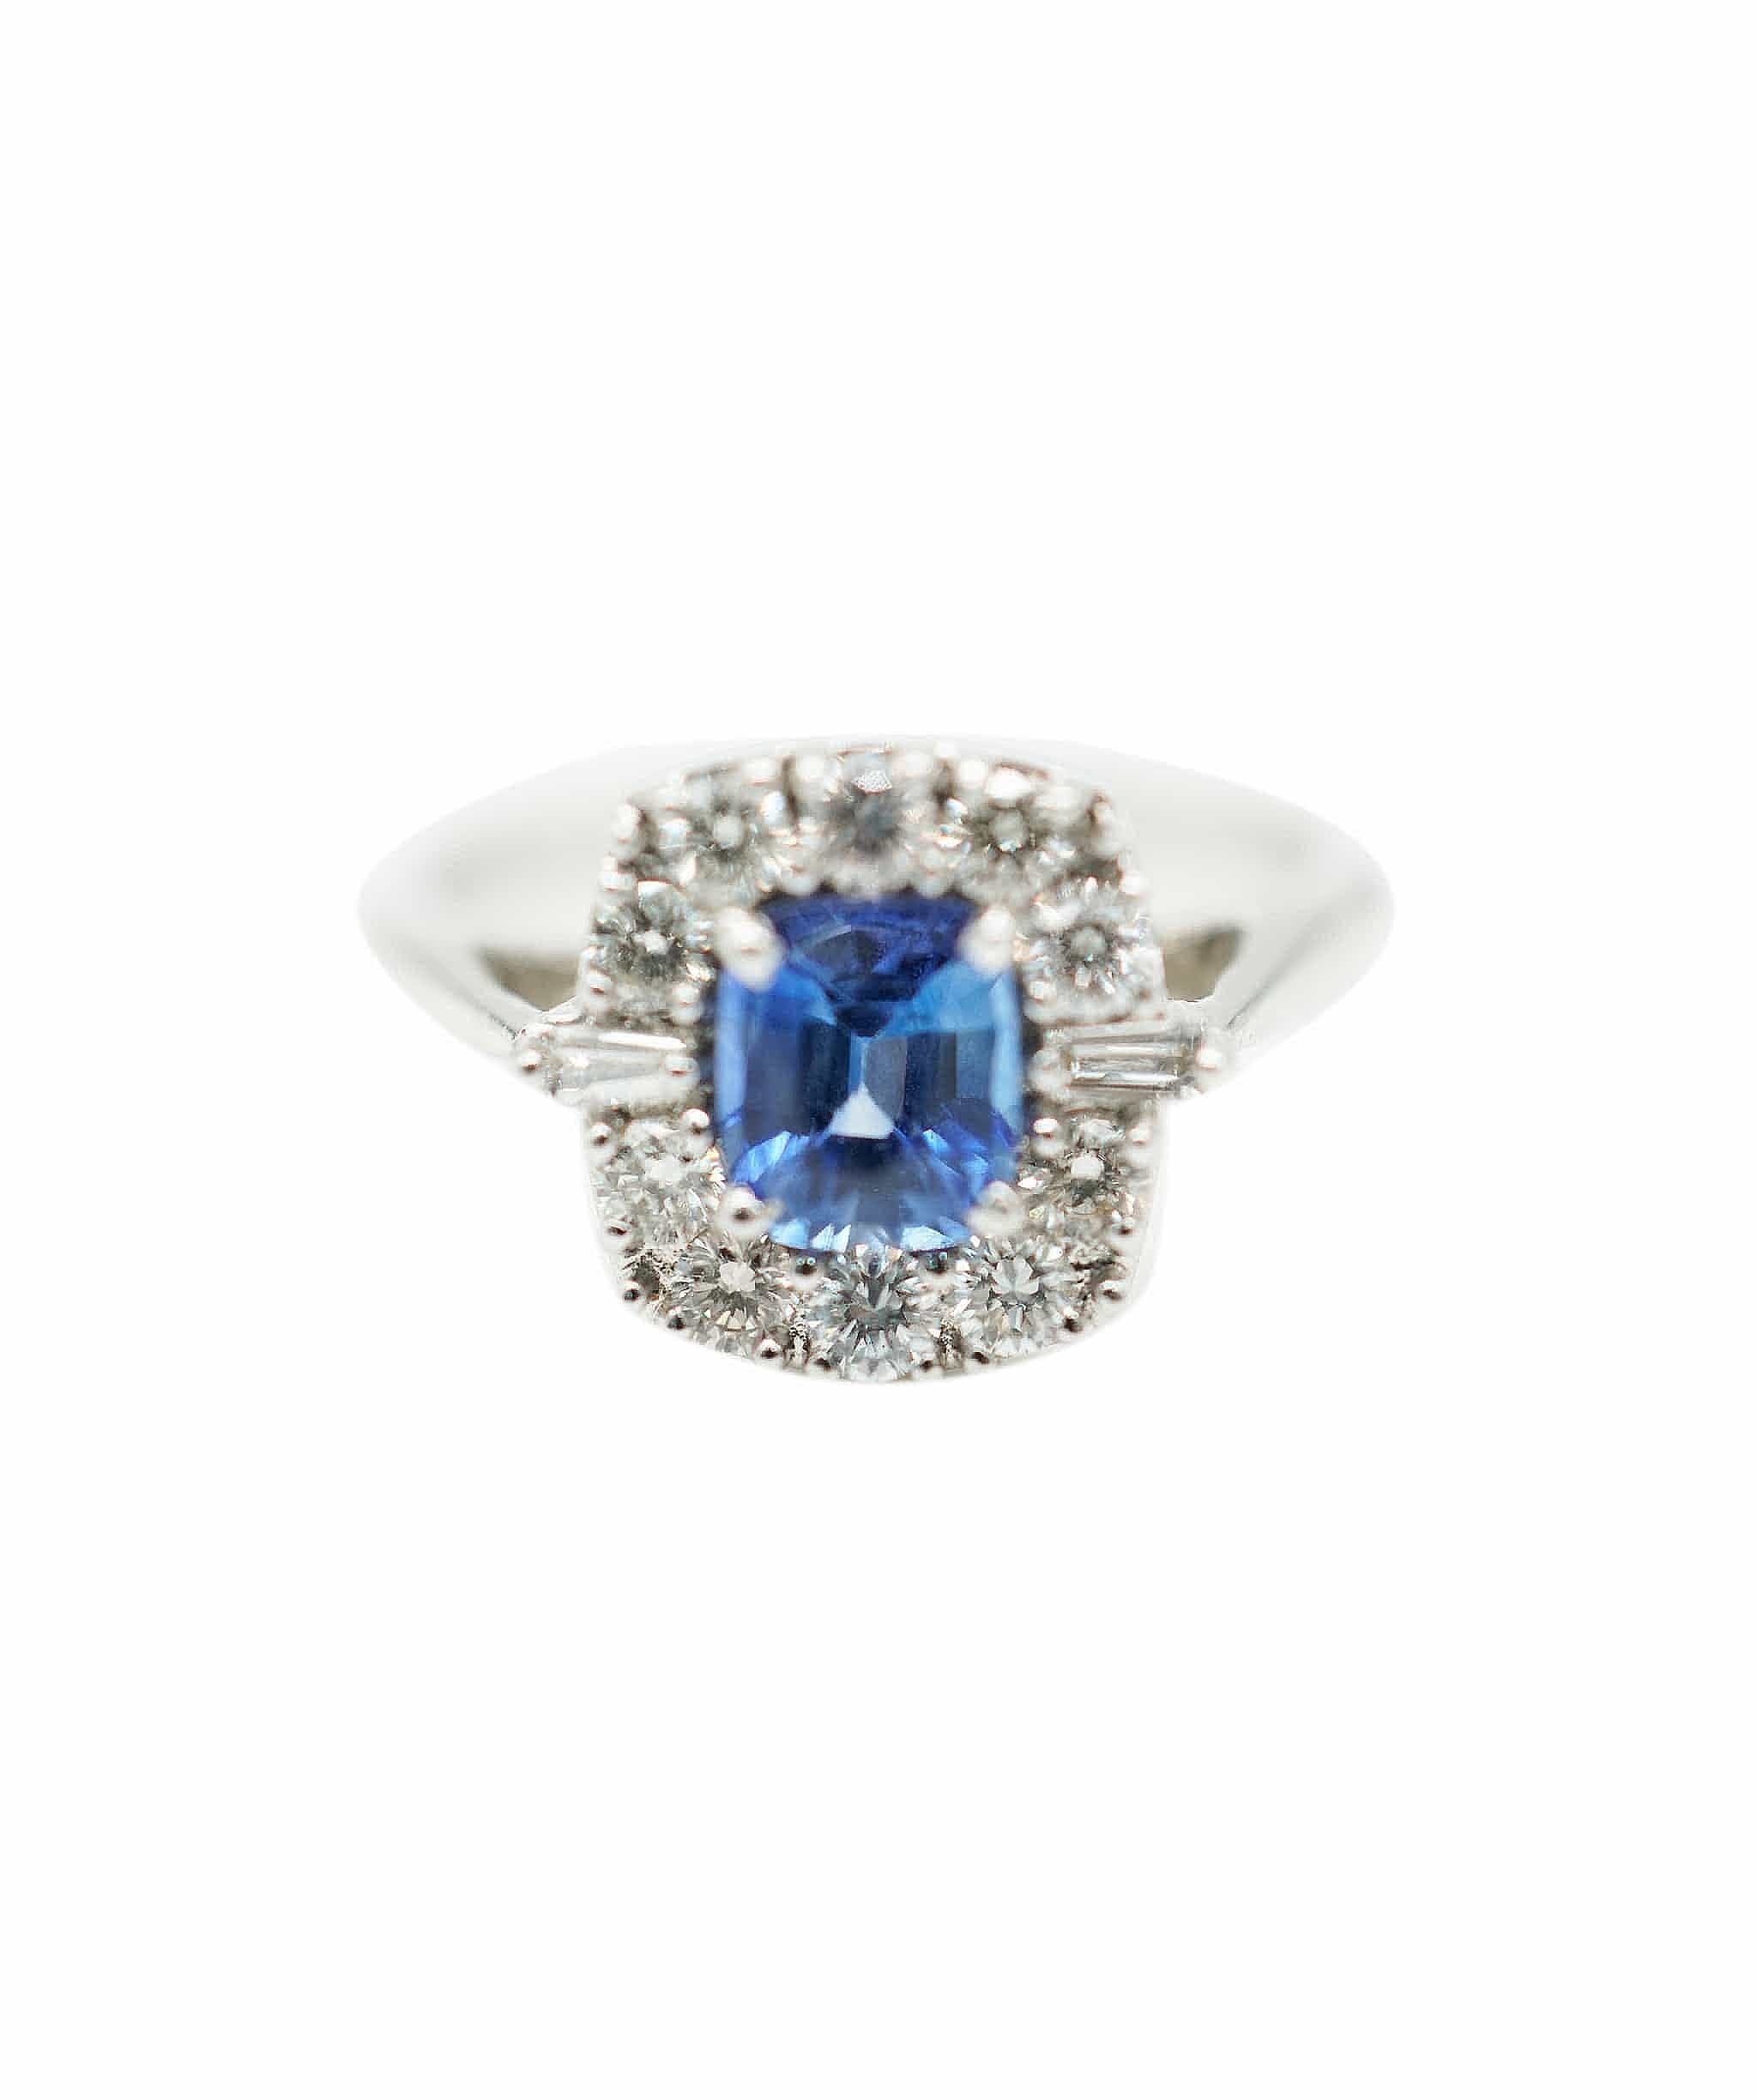 N/A Sapphire (0.95ct) and diamond (apx 0.45ct total) cluster ring 18K WG AHC1191